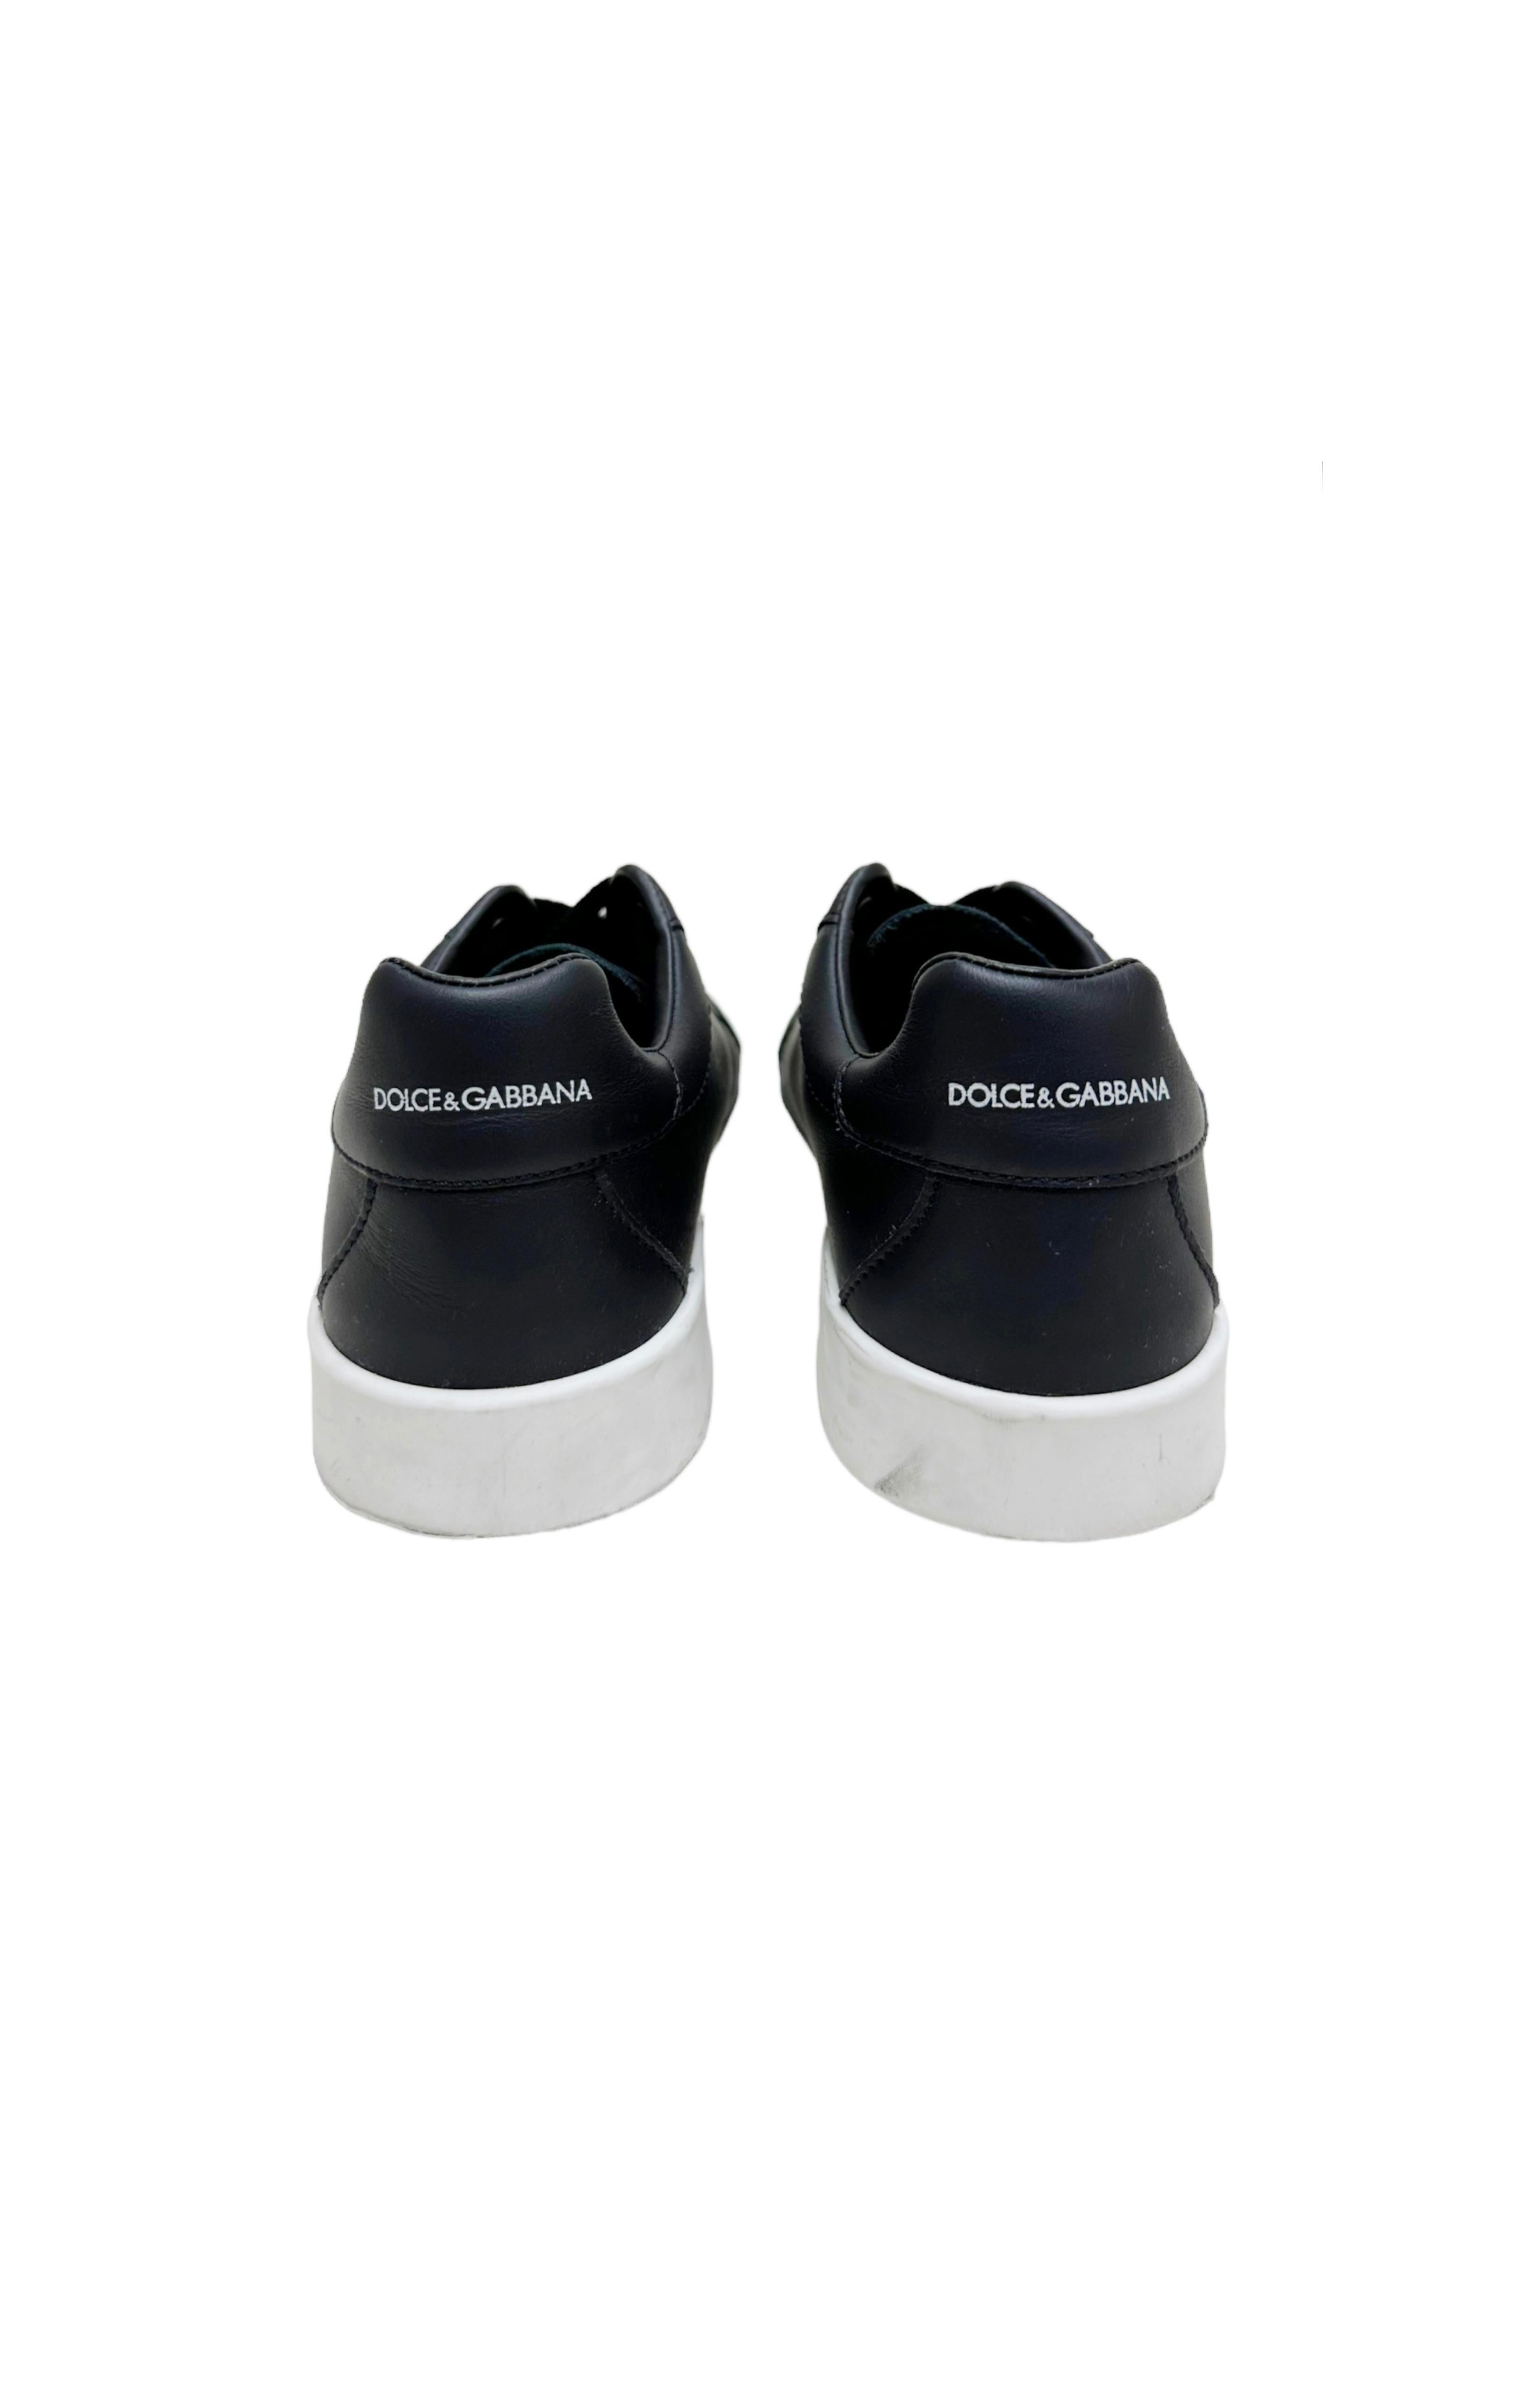 DOLCE & GABBANA Sneakers Size: EUR 31 / Fits like Toddler US 13